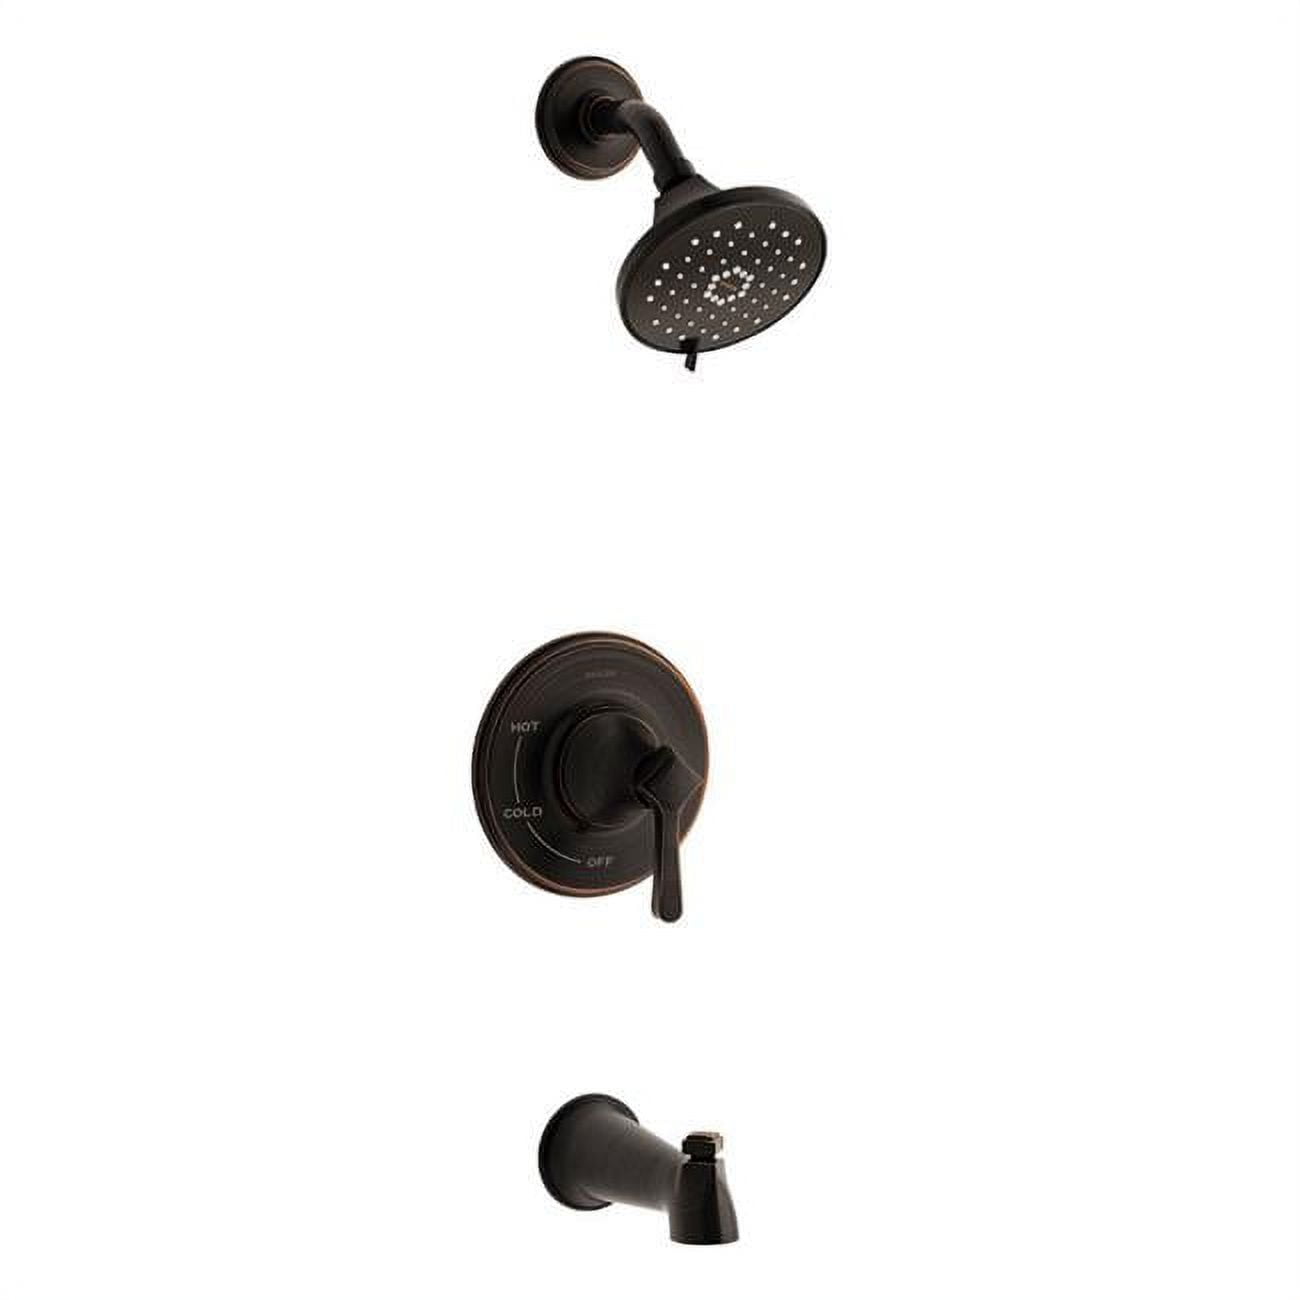 4717328 Georgeson 1 Handle Tub & Shower Faucet, Oil Rubbed Bronze - Metal